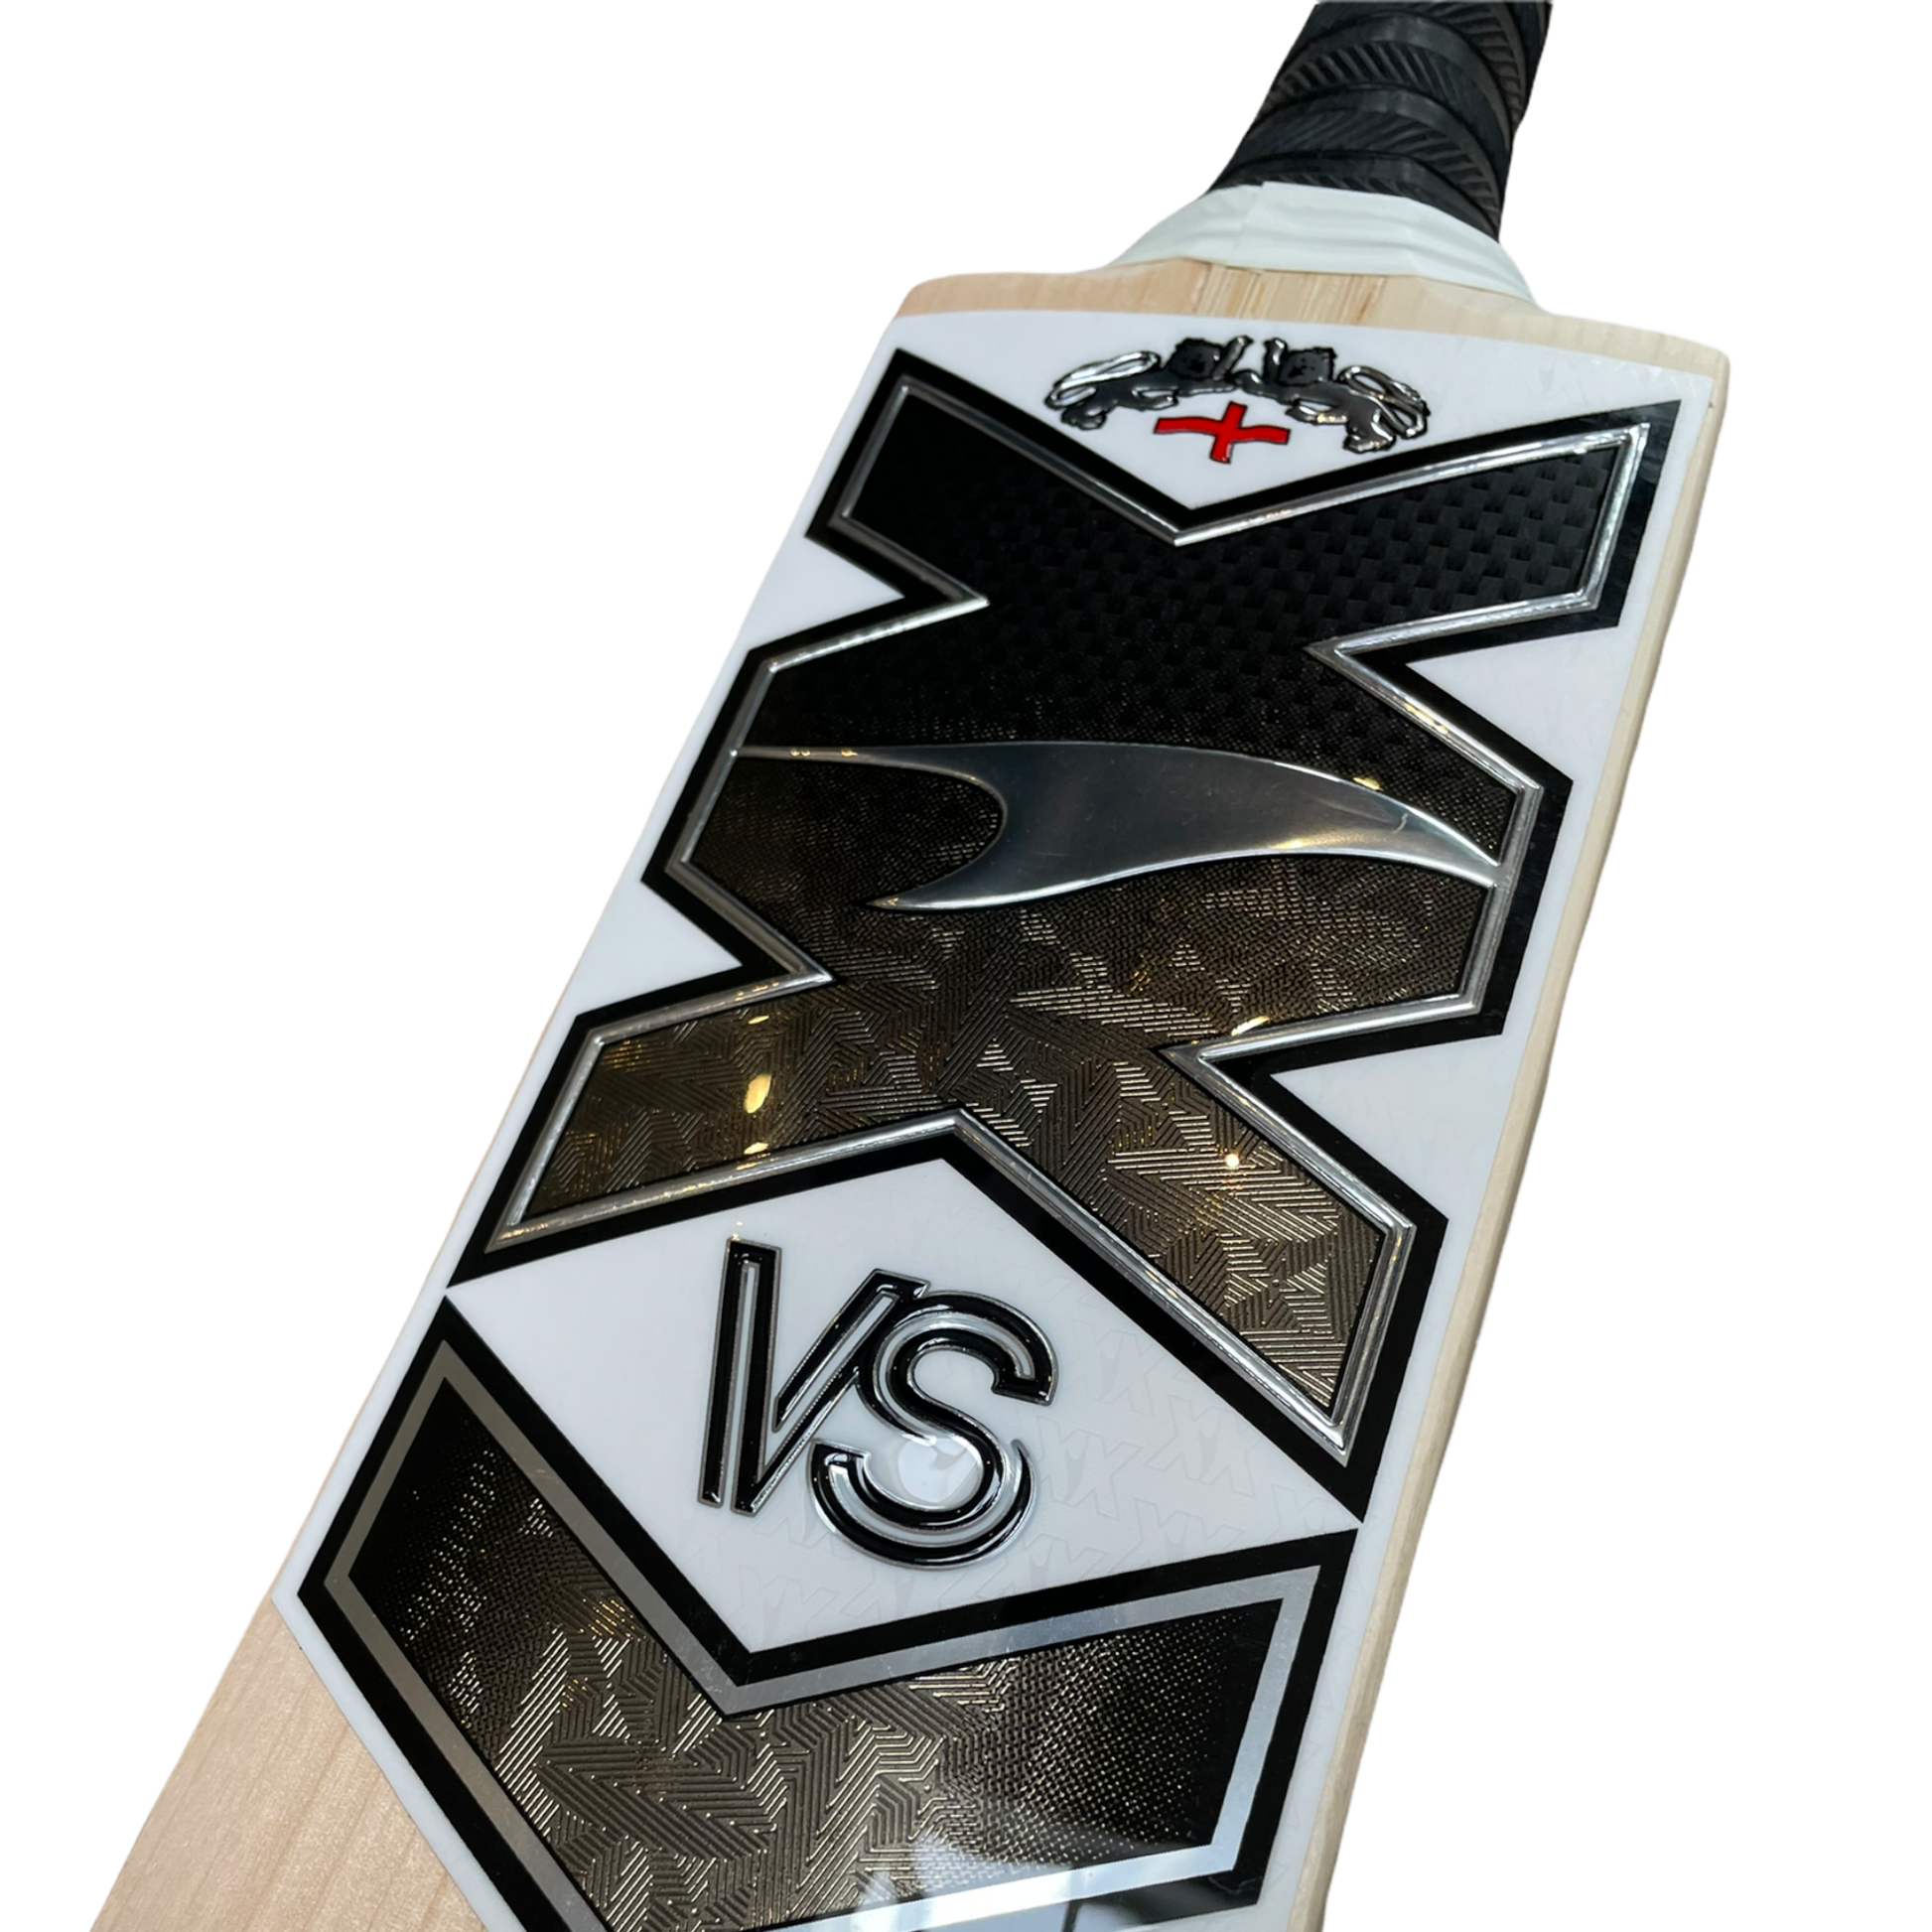 XX Cricket Norfolk Handmade cricket bat handcrafted Grade 1 Grade 2 the best Hove East Sussex Same day pick up next day delivery